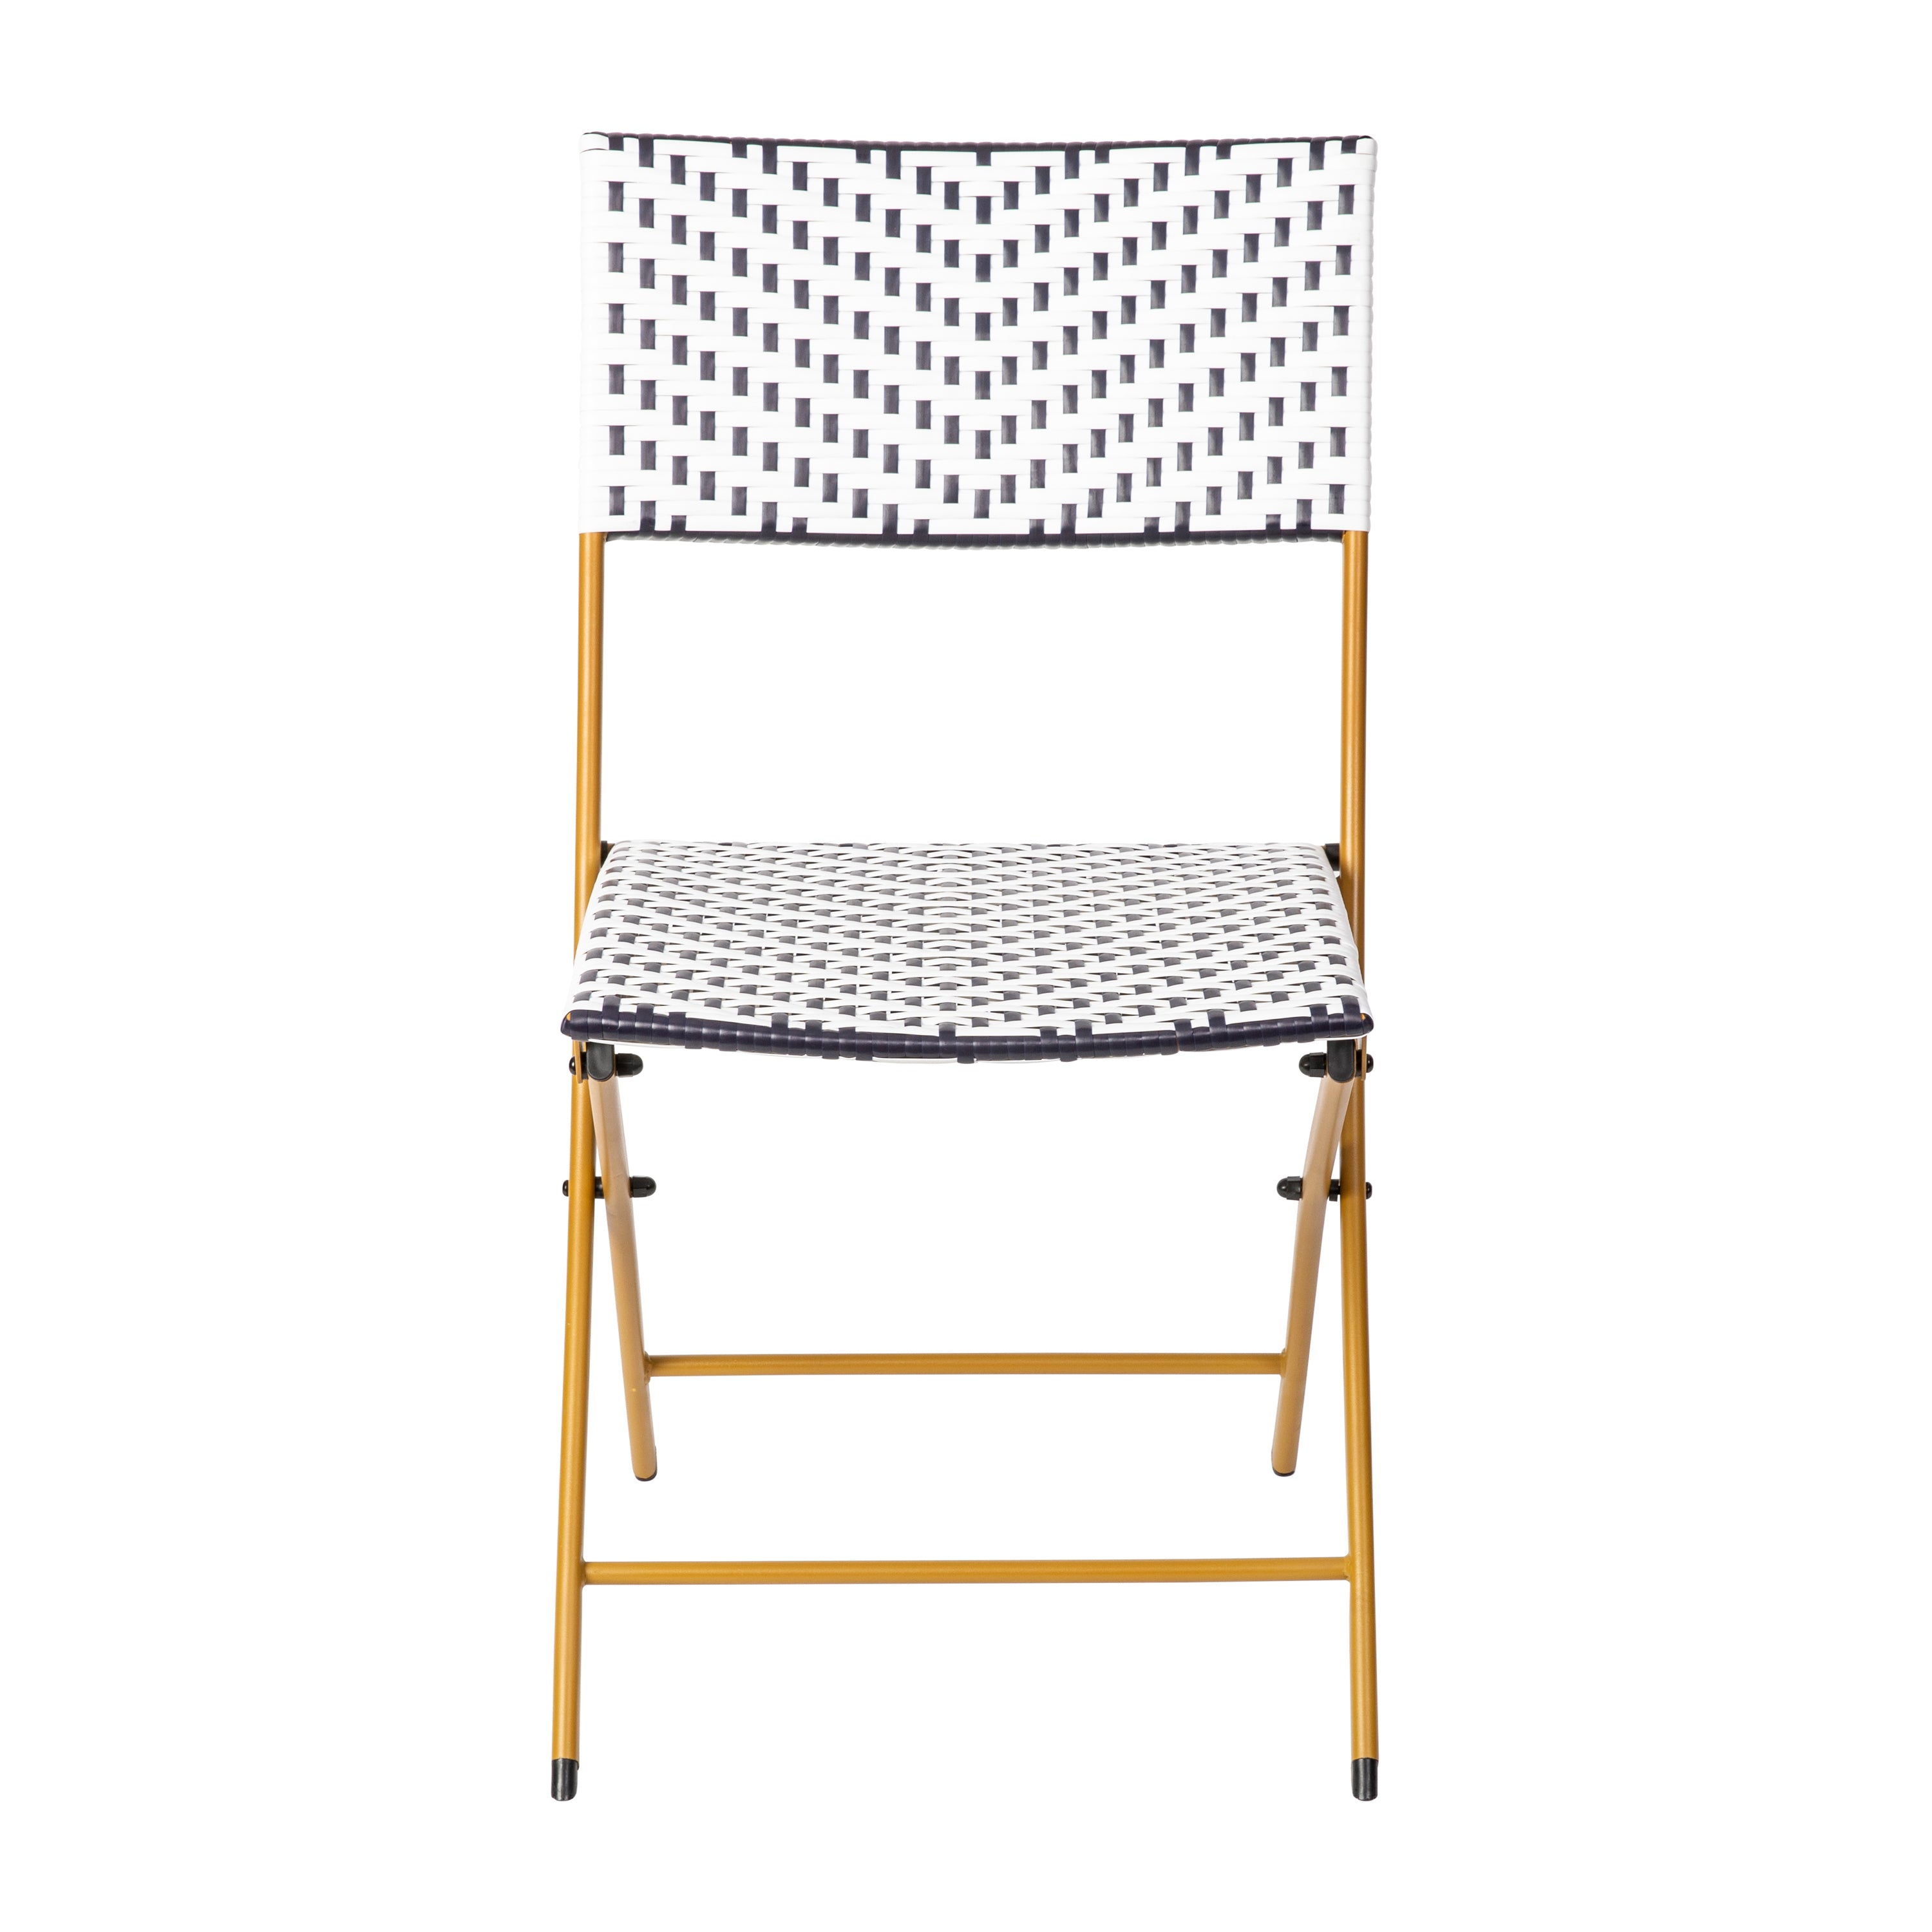 Rouen Set of Two Folding French Bistro Chairs in PE Rattan with Metal Frames for Indoor and Outdoor Use-French Bistro Folding Chair-Flash Furniture-Wall2Wall Furnishings